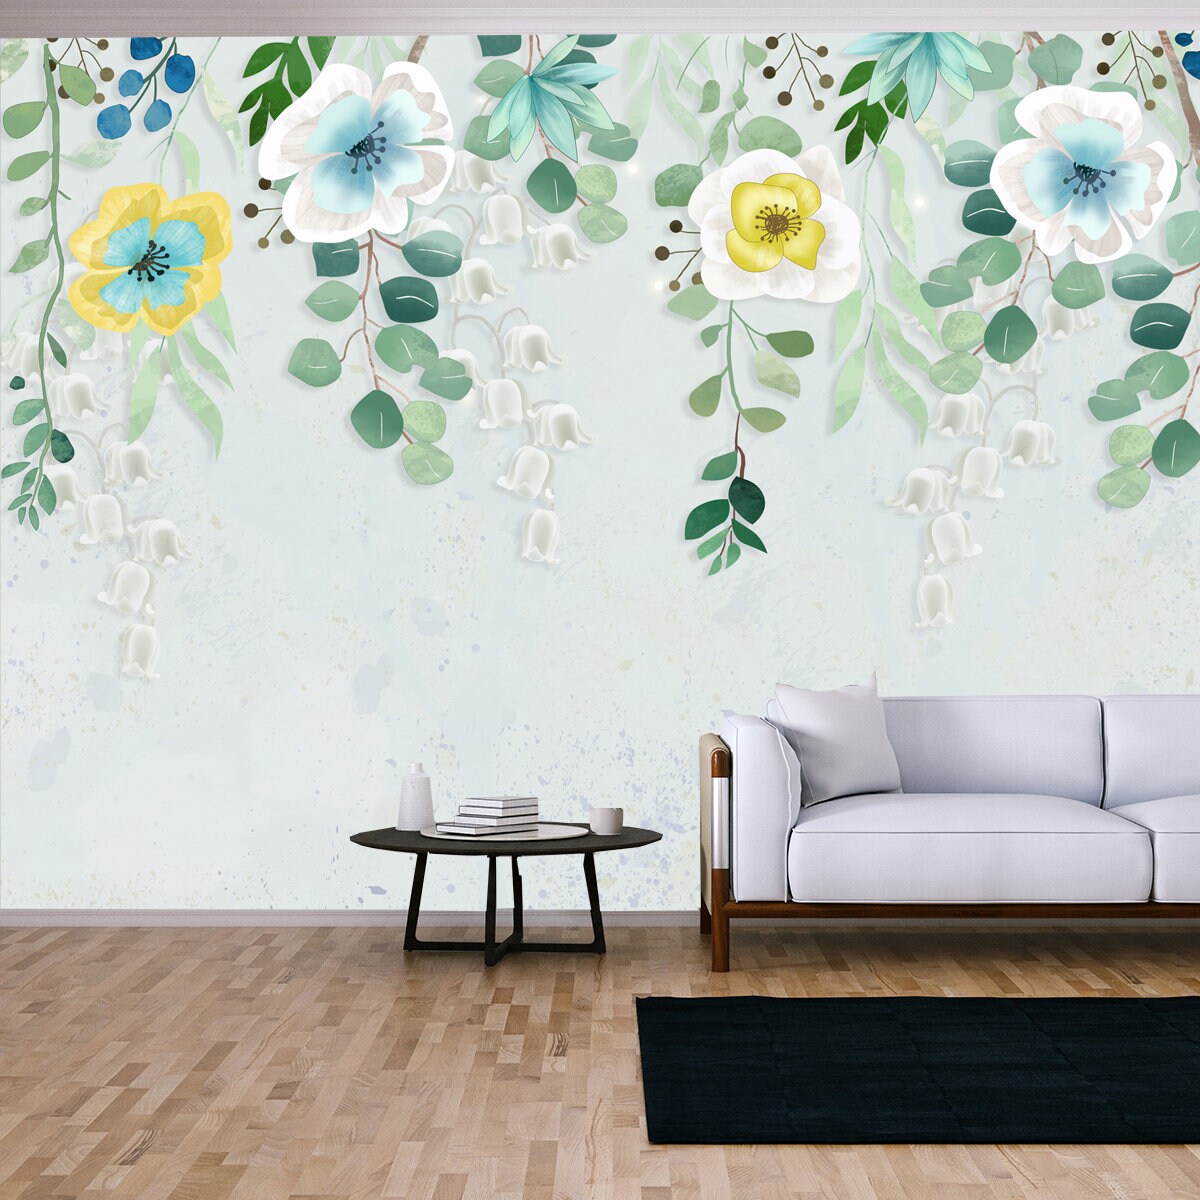 3d Illustration, Fabulous Multi-Colored Flowers Hanging from the Top of a Light Wall Wallpaper Living Room Mural